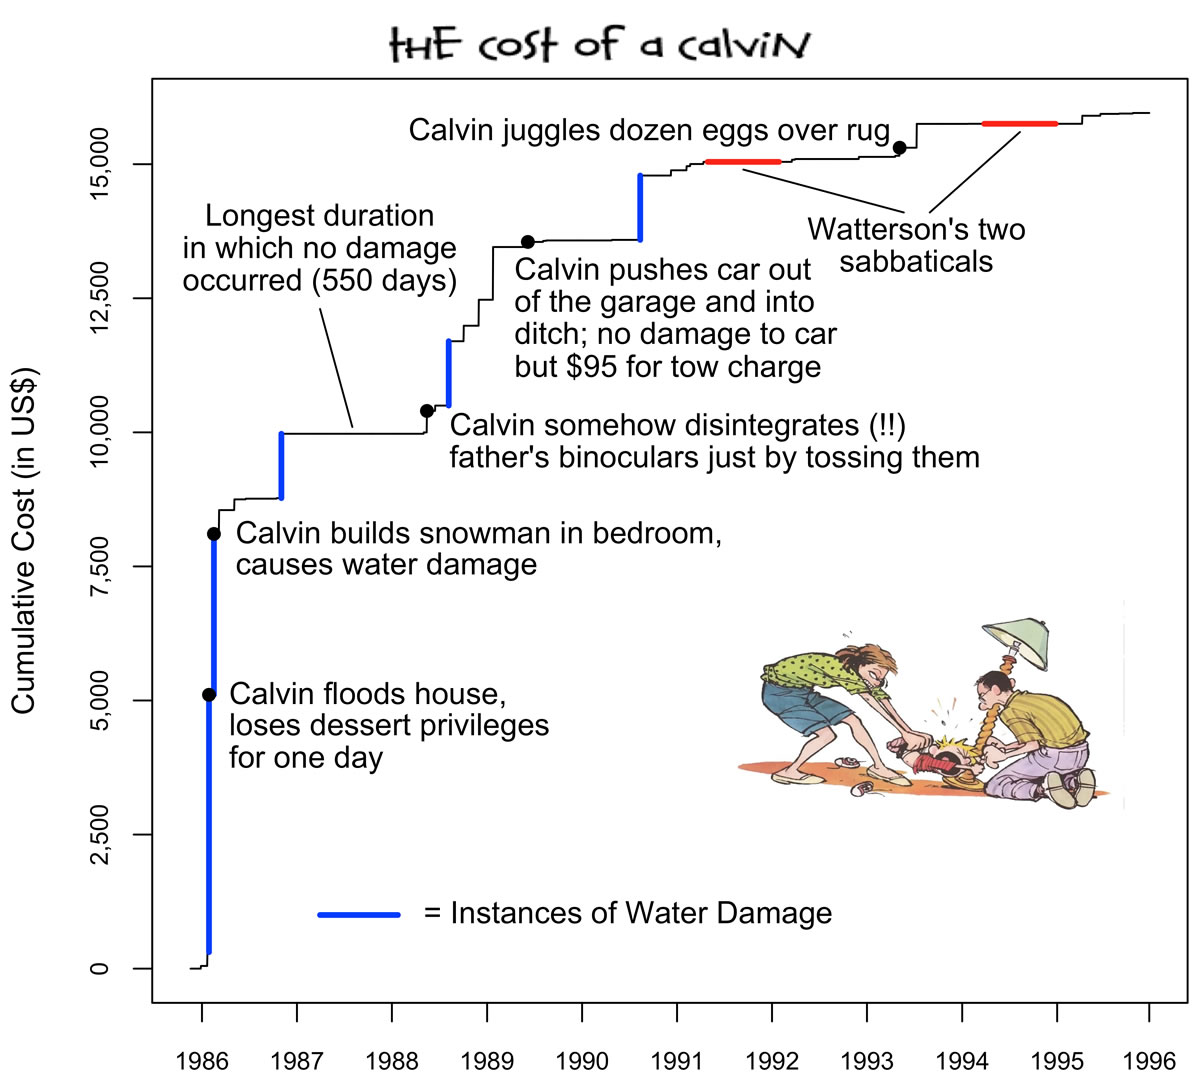 the cost of a calvin